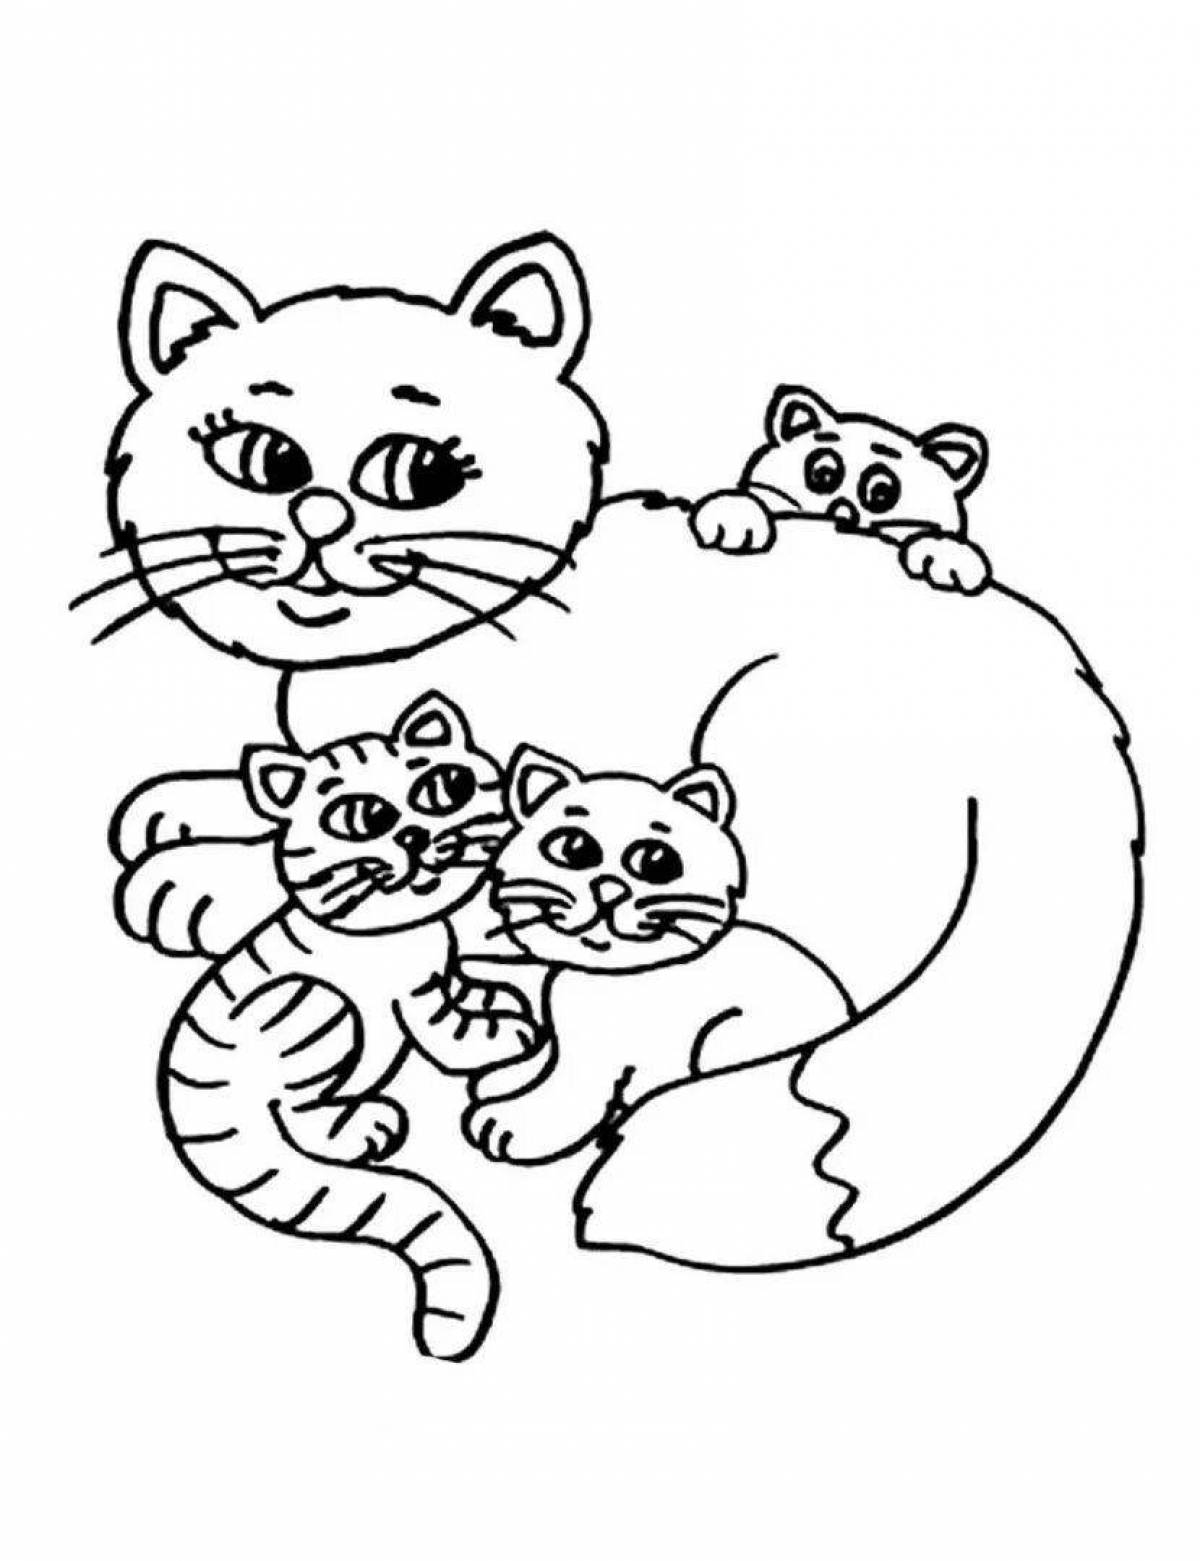 Coloring page playful cat mom